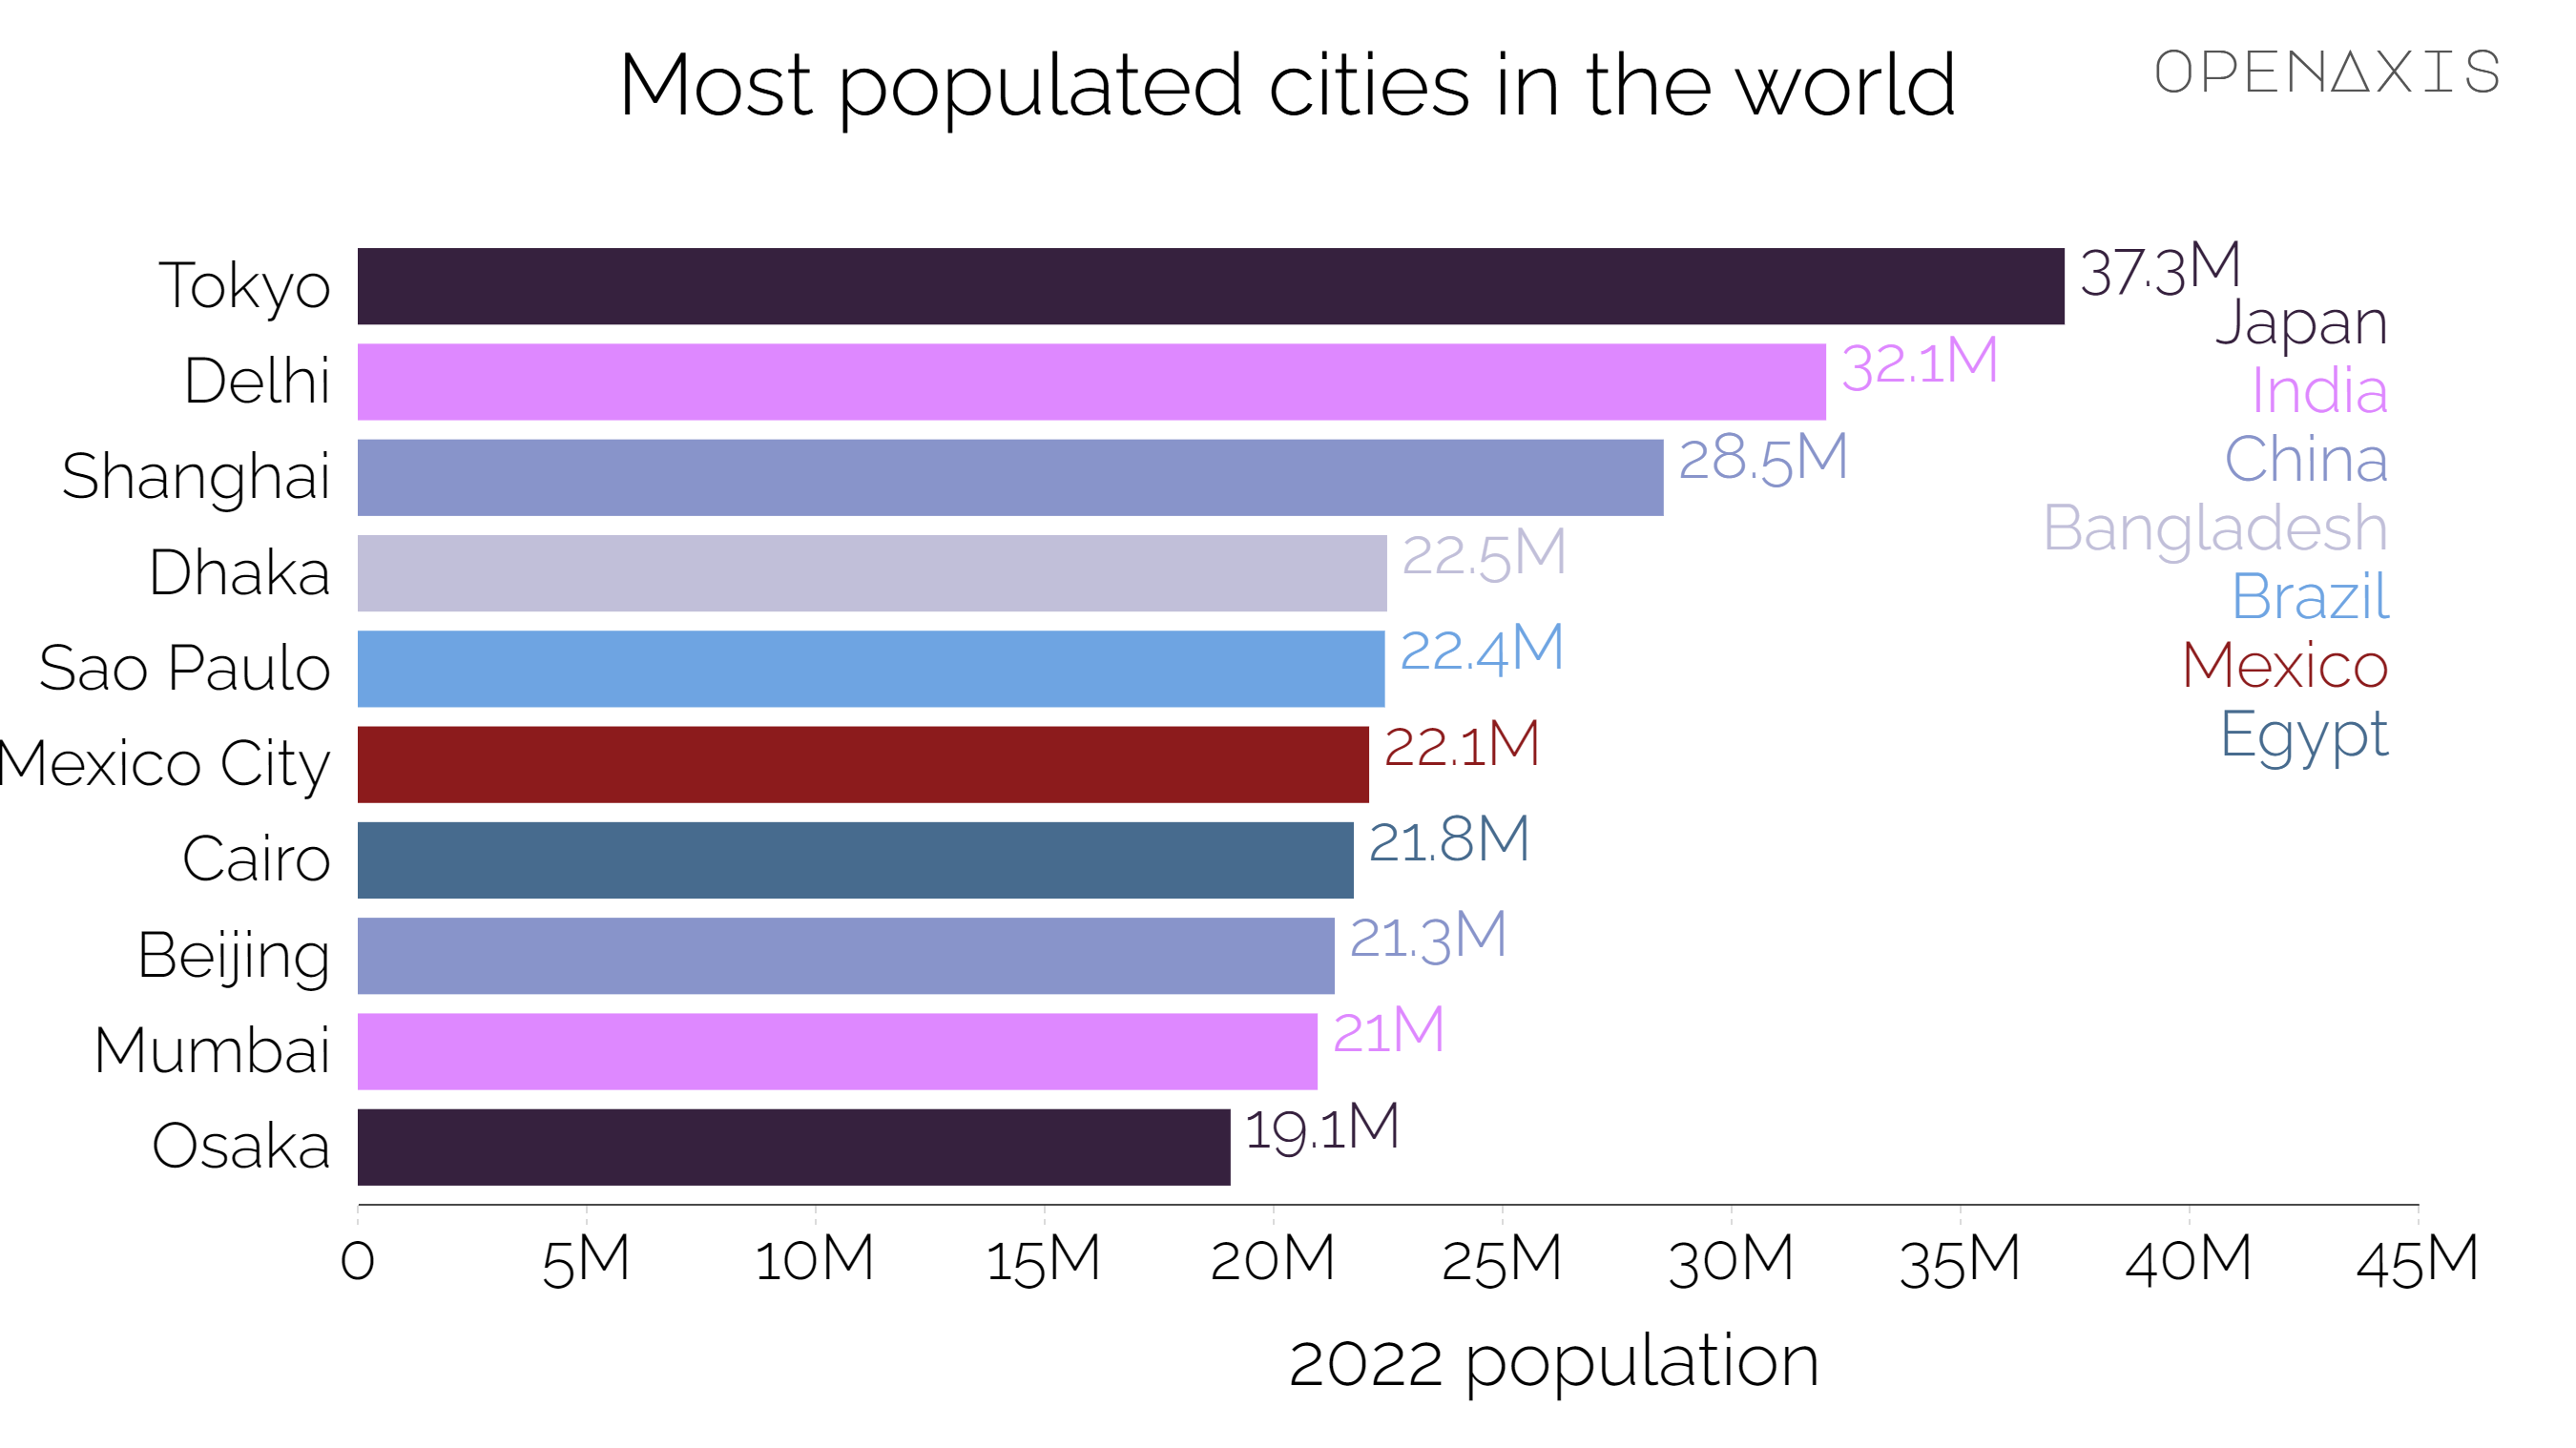 "Most populated cities in the world"